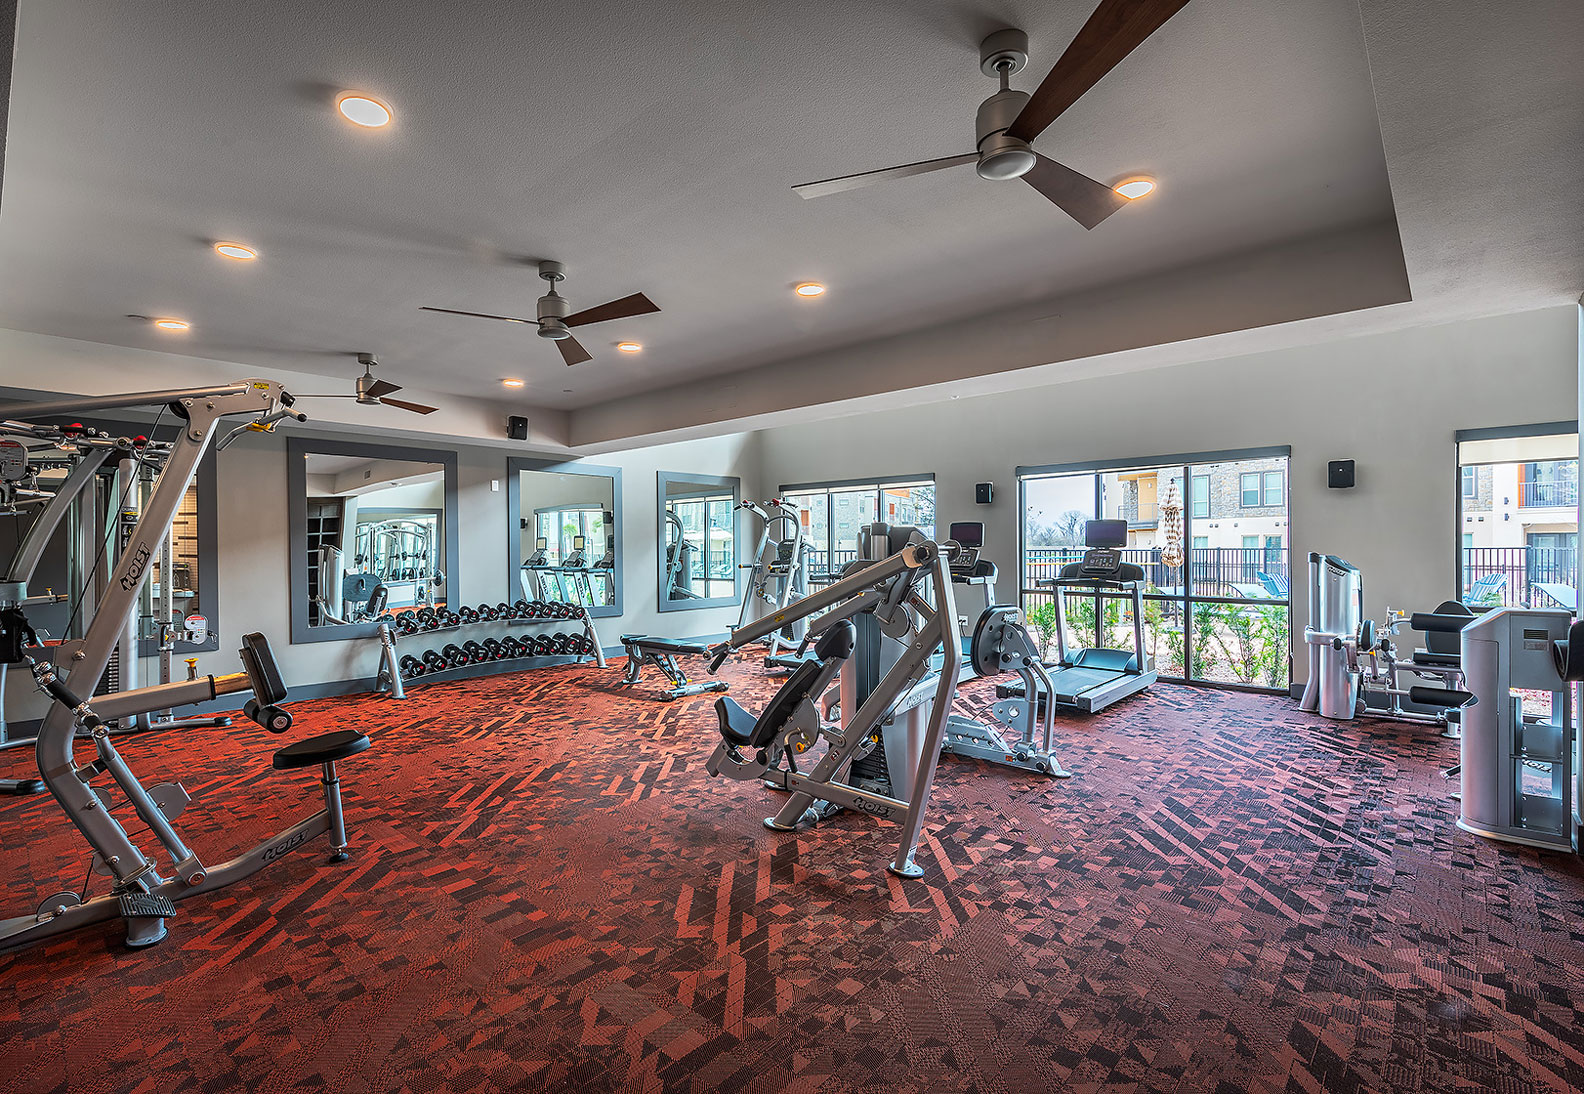 fitness center with free weights, weight machines, and ceiling fans